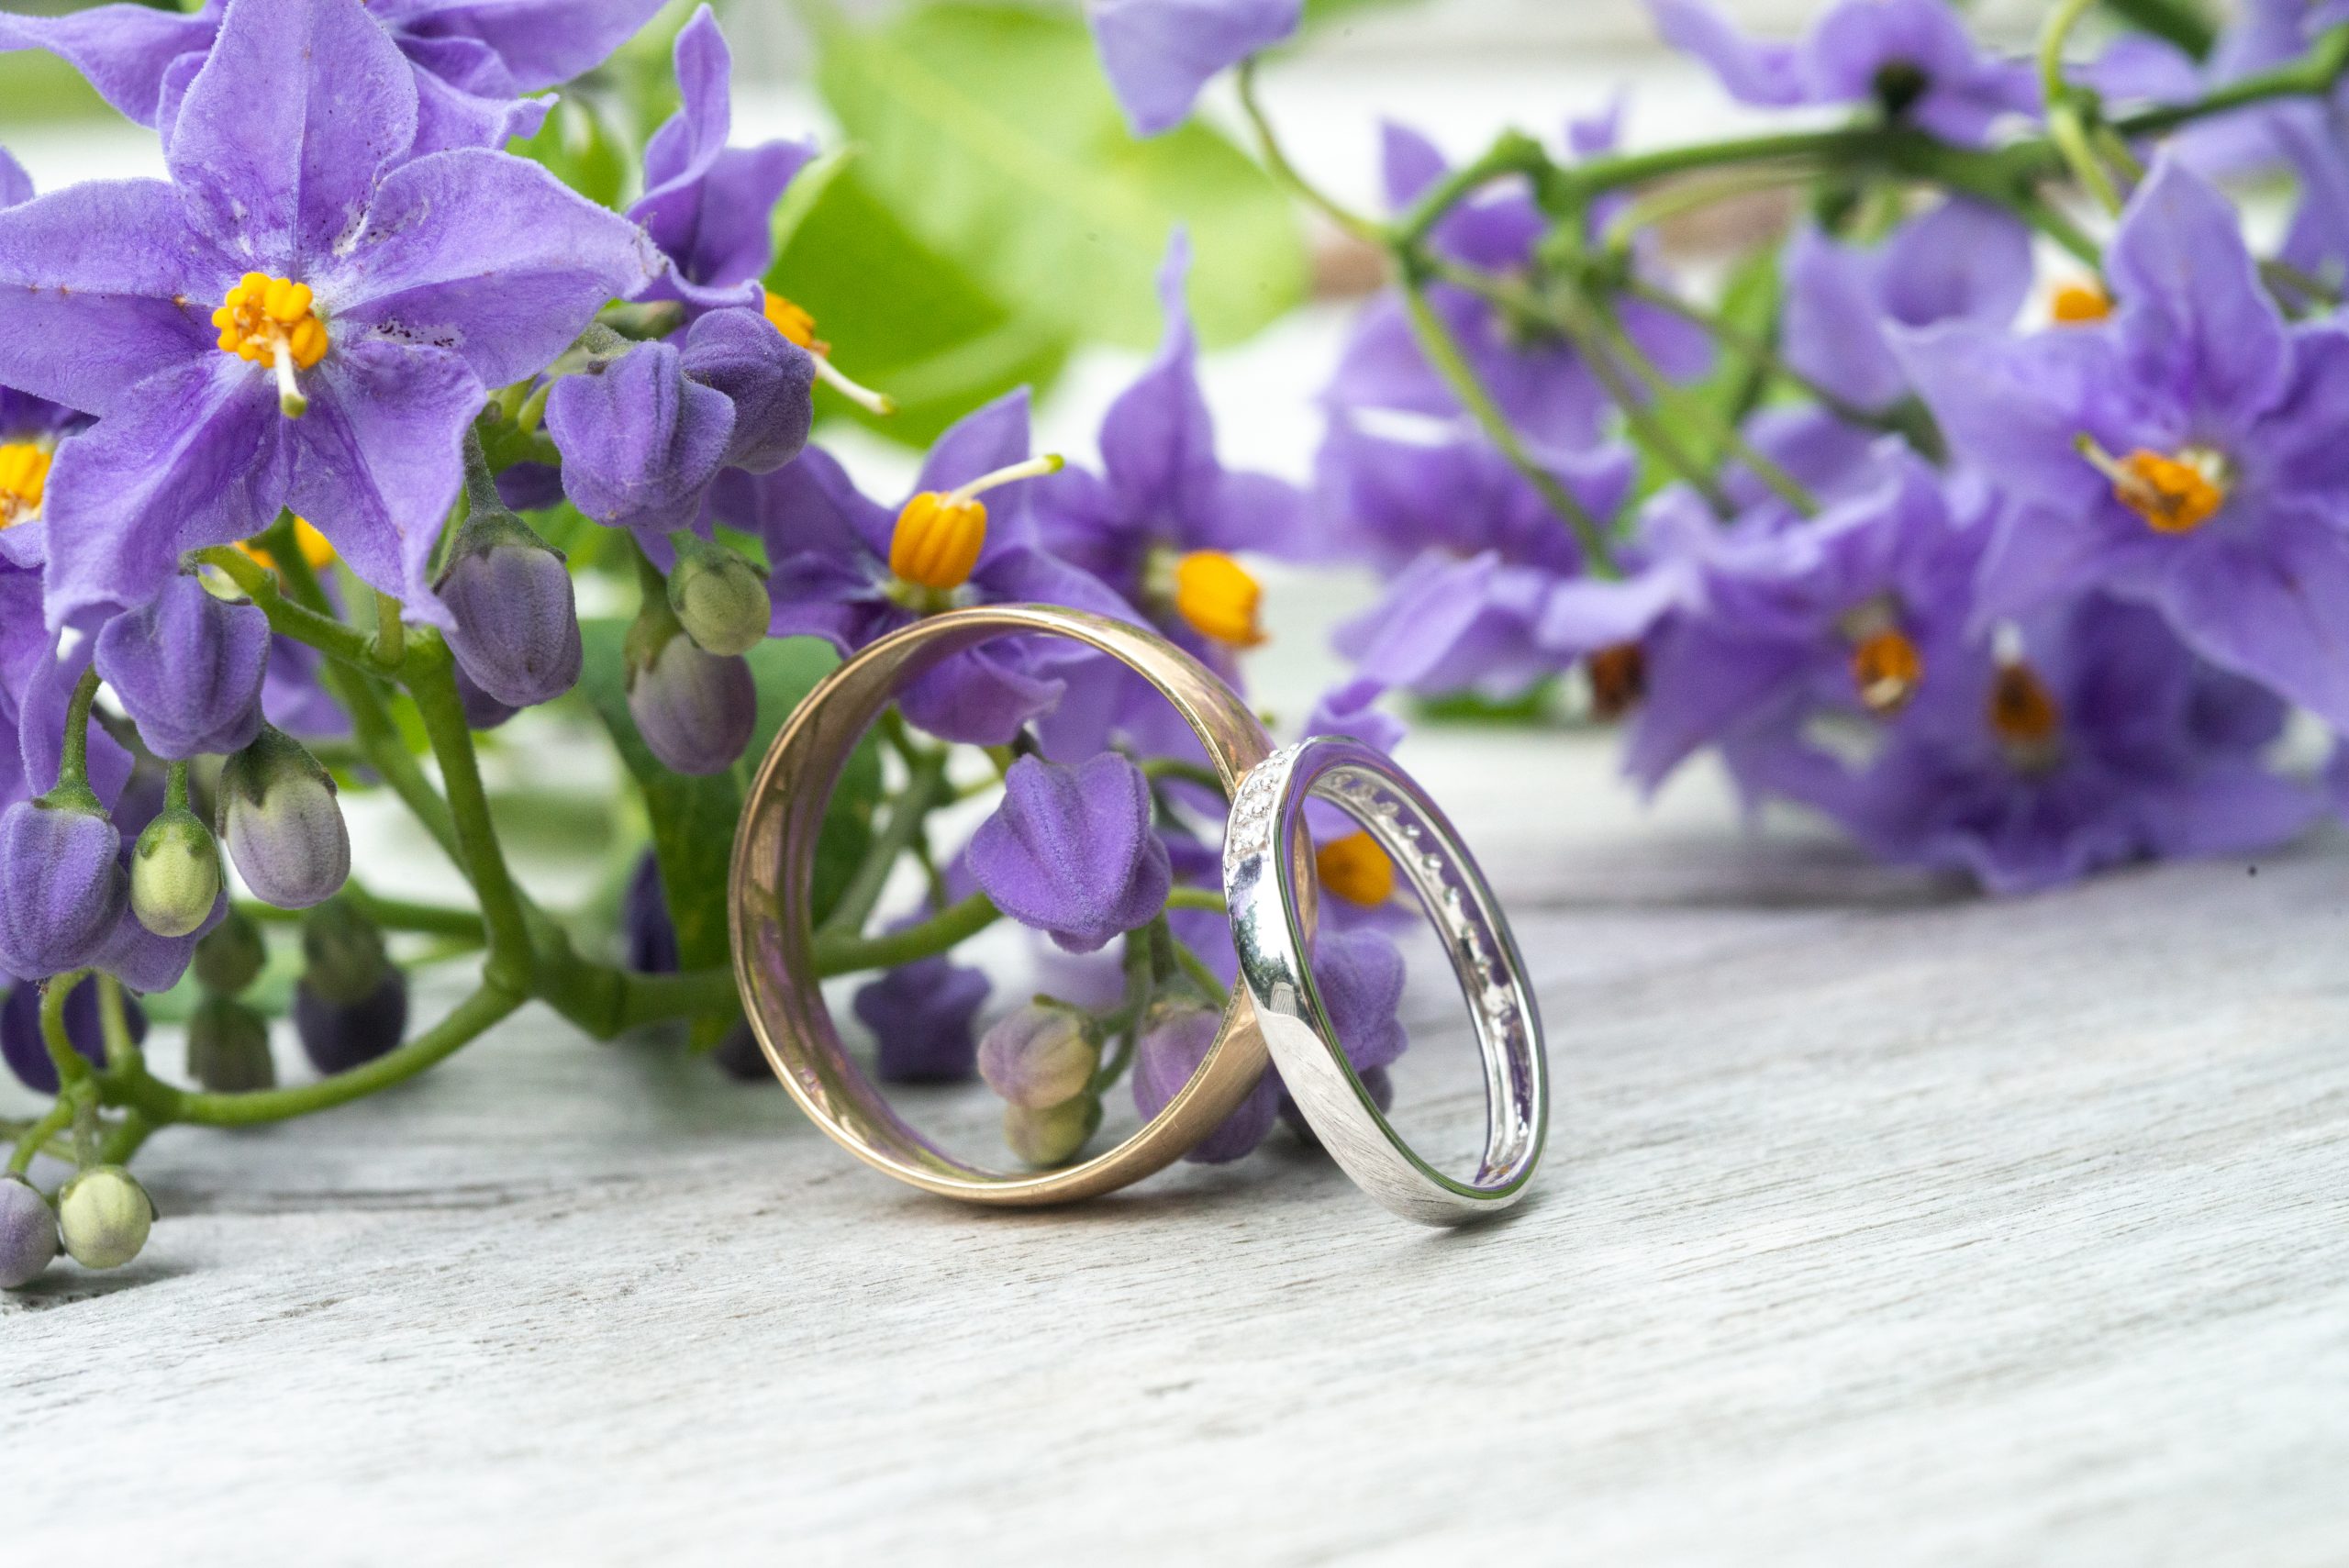 rings in front of puprple bouquet